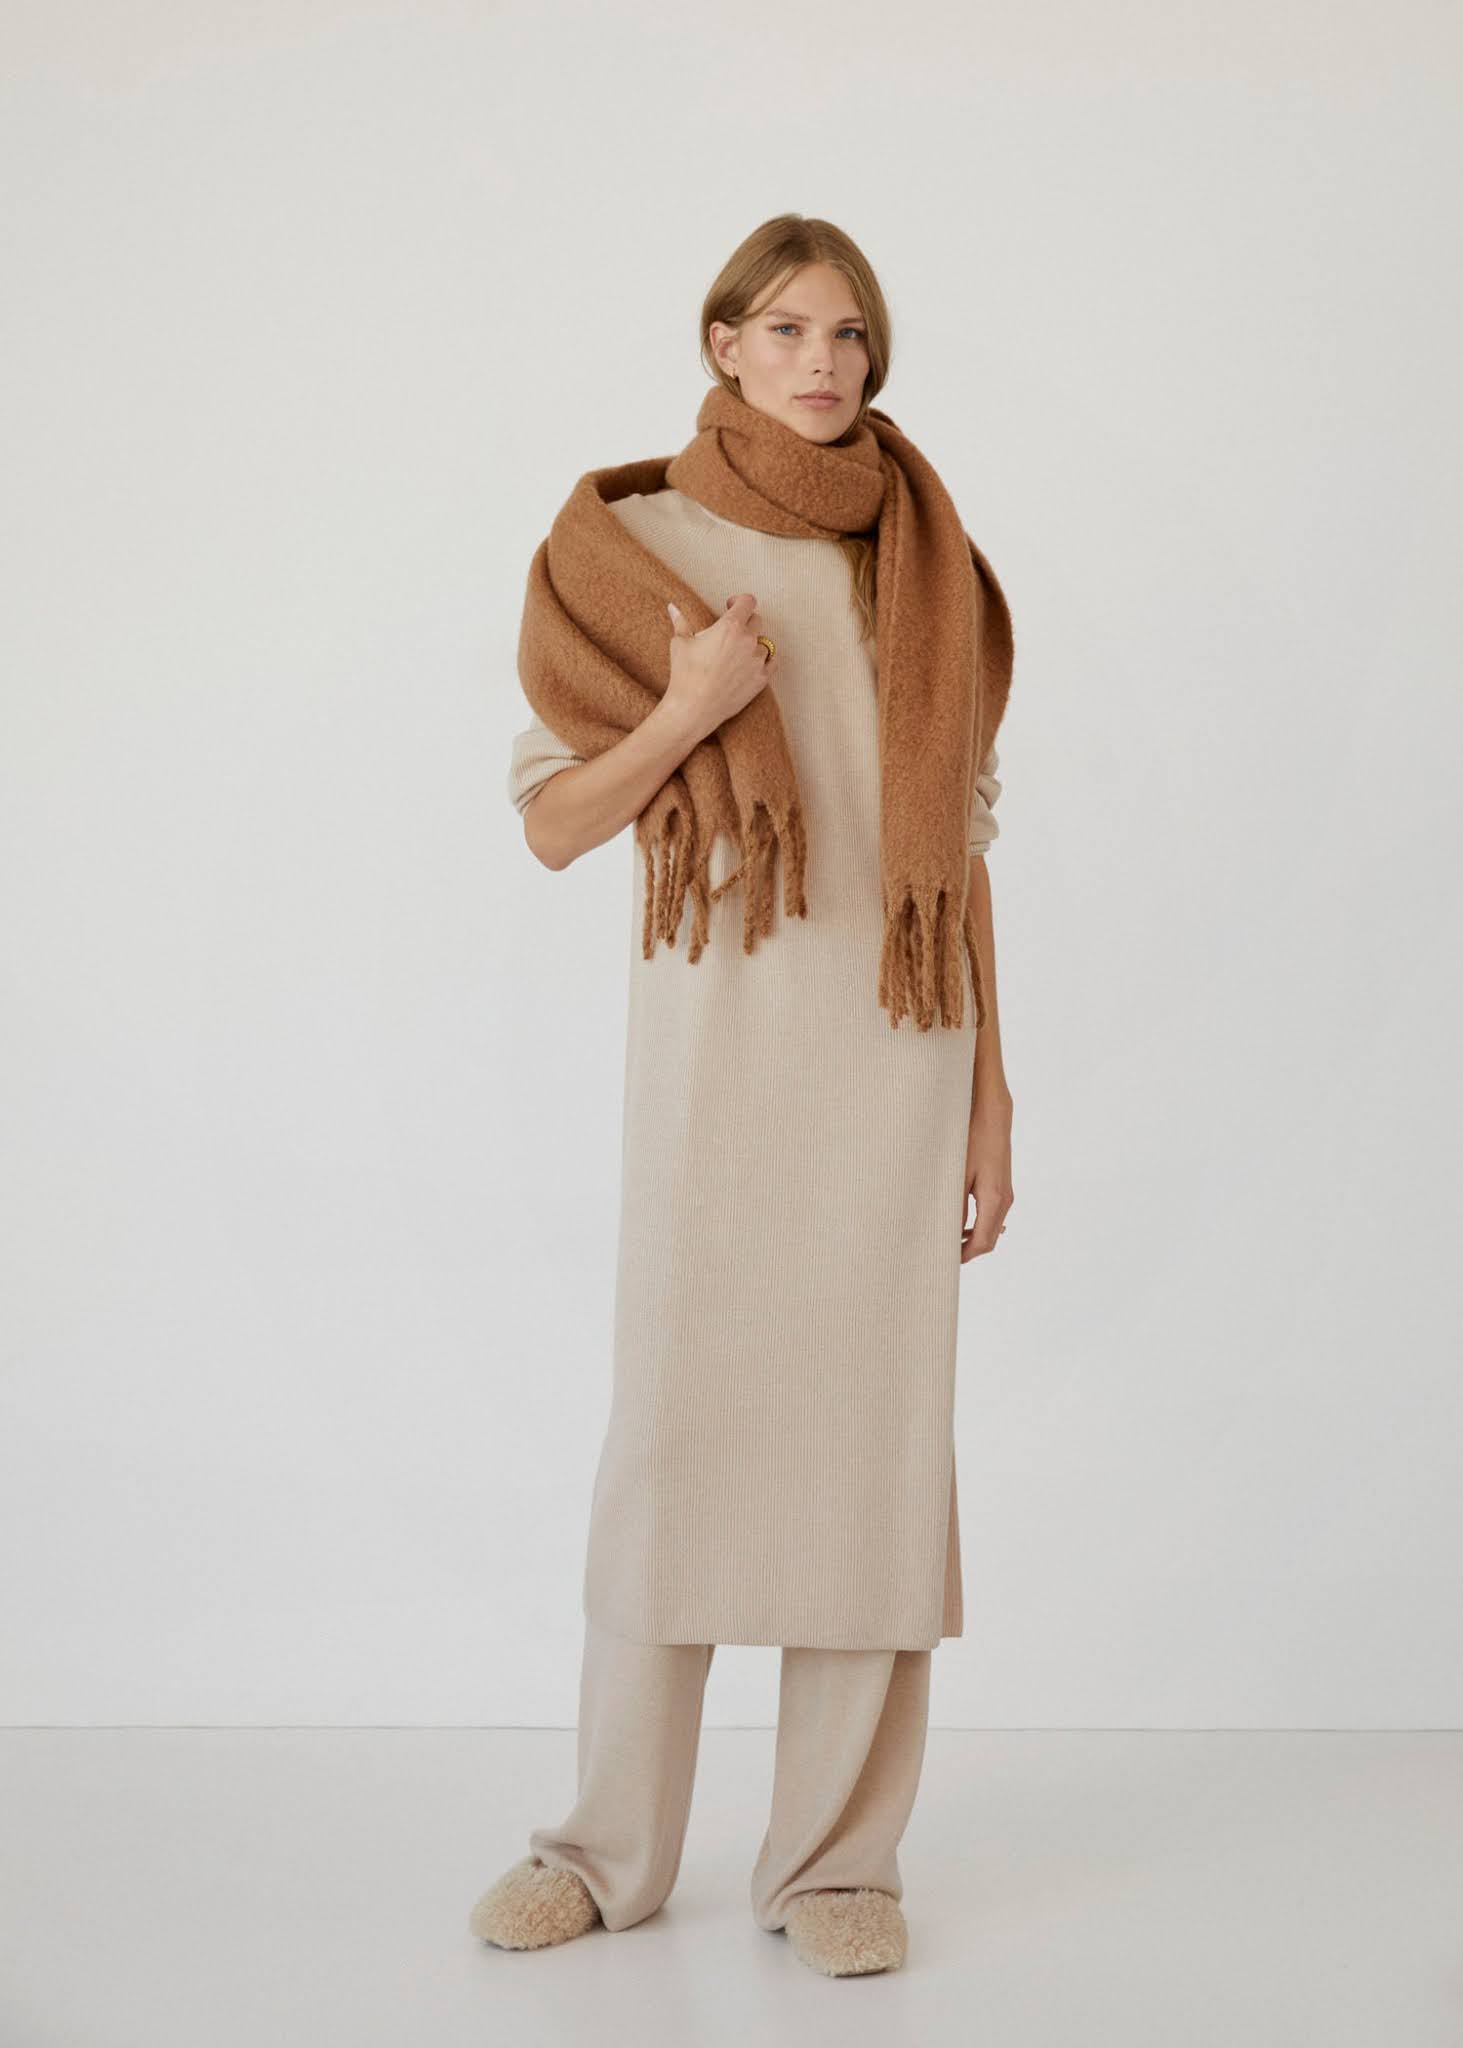 21 Best Oversized Fringe Scarves and Blanket Scarf — Minimalist Winter Outfit Accessories Inspiration